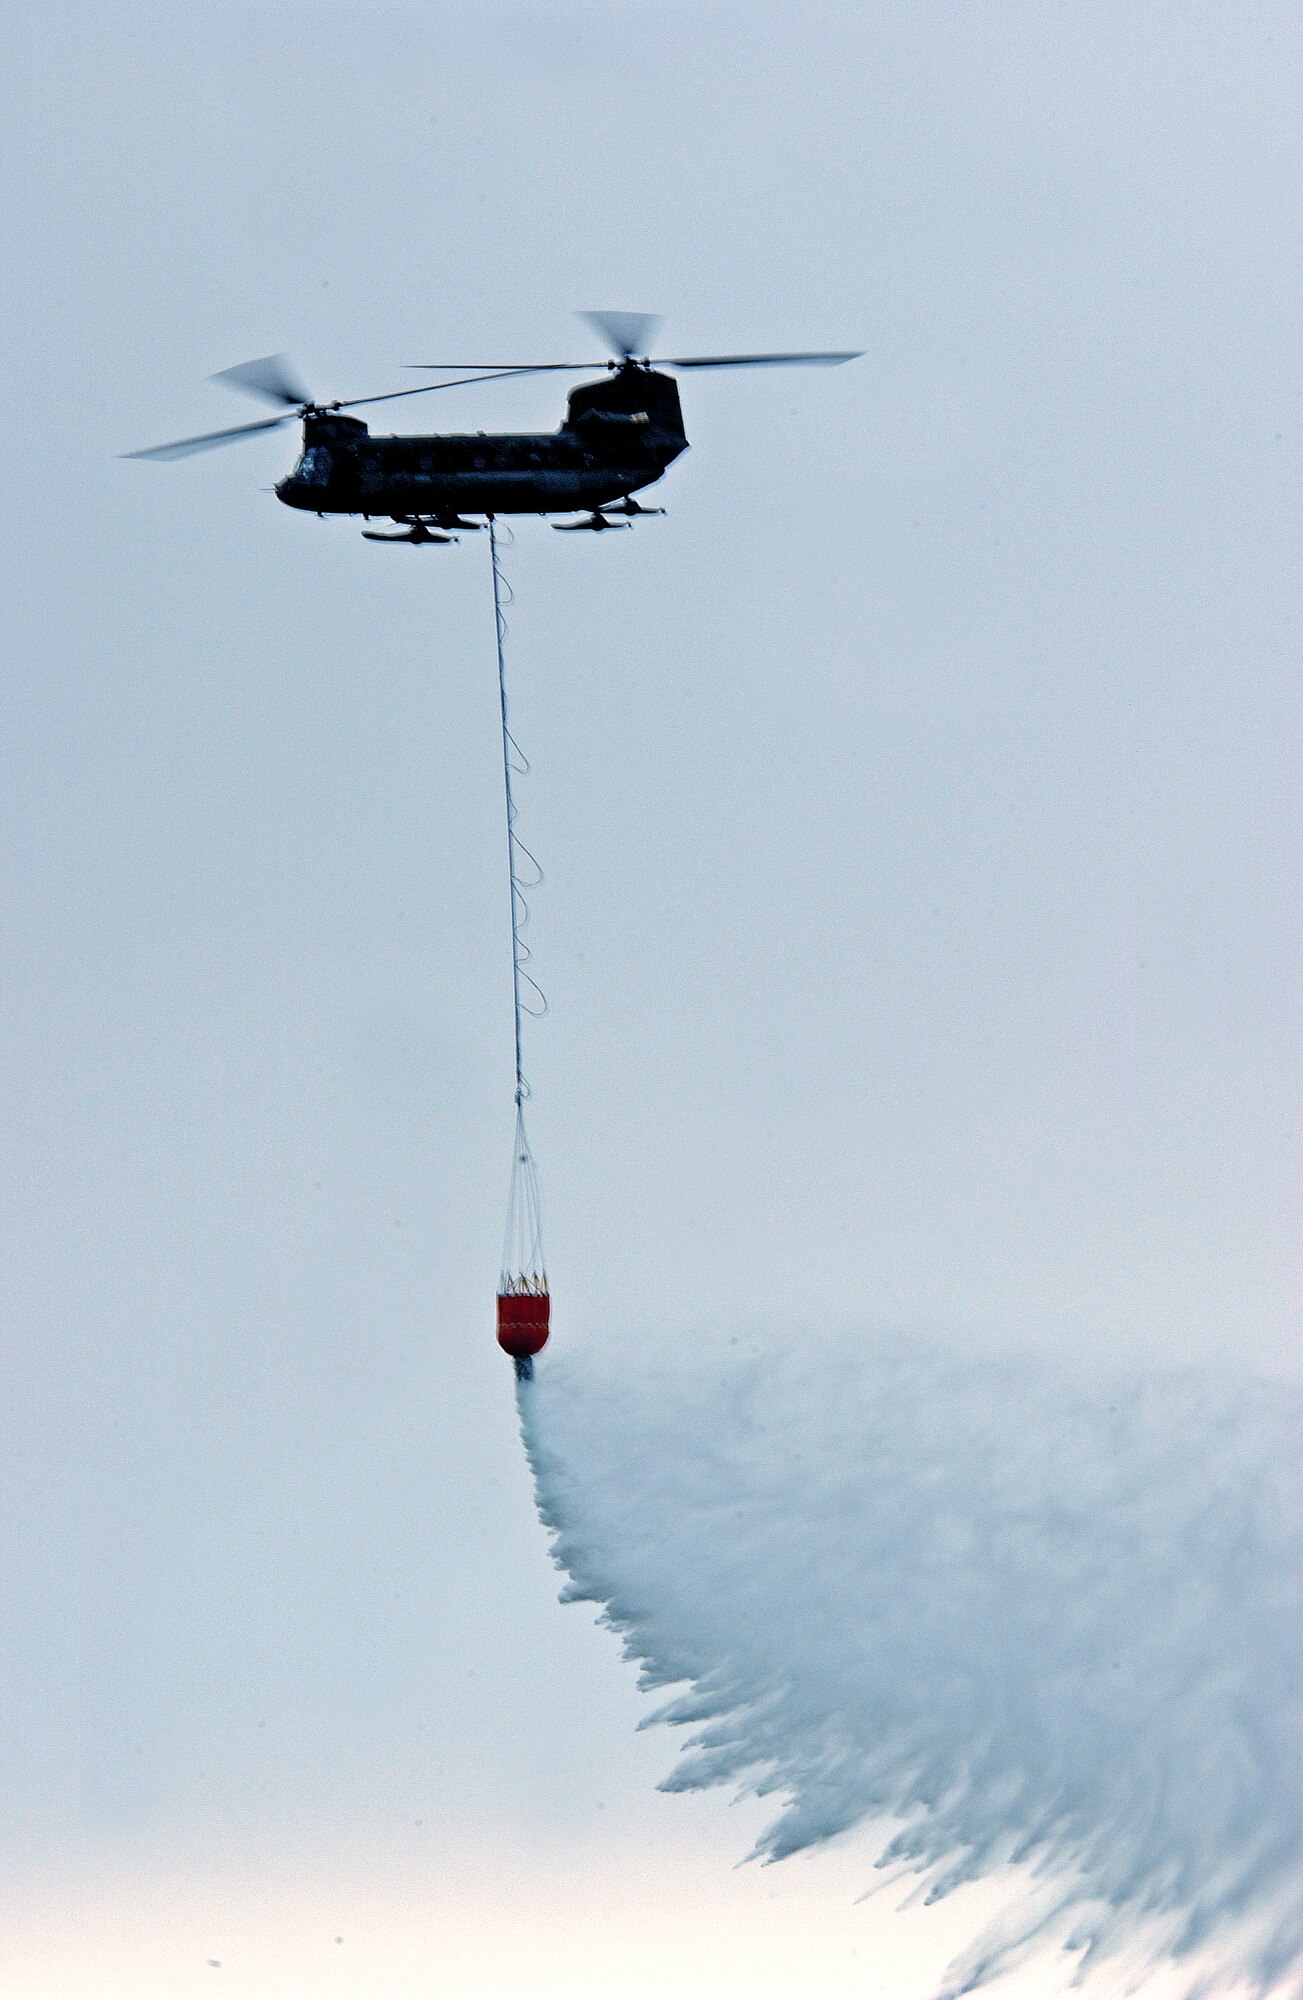 EIELSON AIR FORCE BASE, Alaska--A CH-47 Chinook makes a water drop during the 2007 Soaring into Solstice Open House June 23 here. More than 25,000 people attended the all-day event featuring aerial and ground demonstrations including flybys, simulated airfield attacks, and aerobatic maneuvers as well as concessions, live music and many aircraft displays. (U.S. Air Force photo by Senior Airman Justin Weaver)